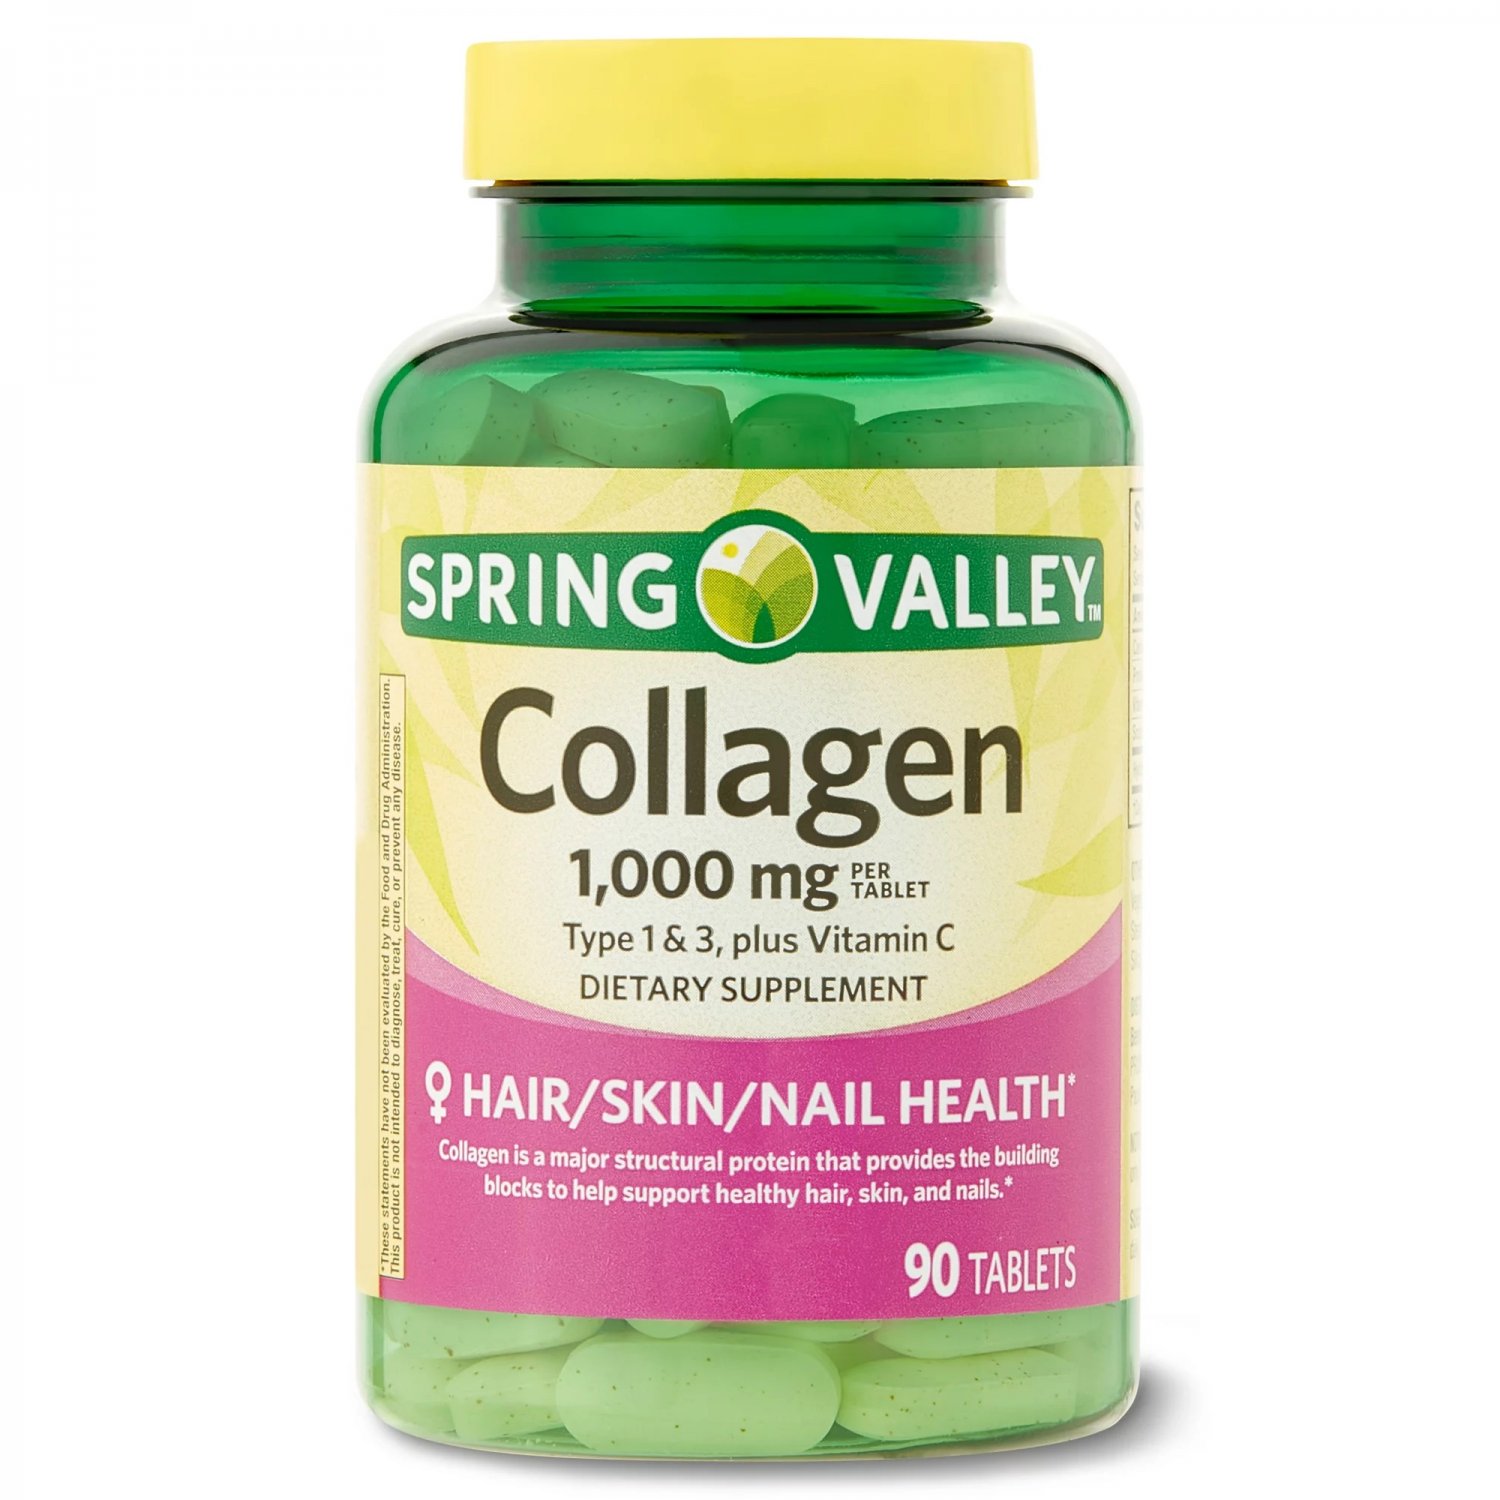 Spring Valley Collagen Type 1 & 3 Plus Vitamin C 1,000 mg 90 Tablets